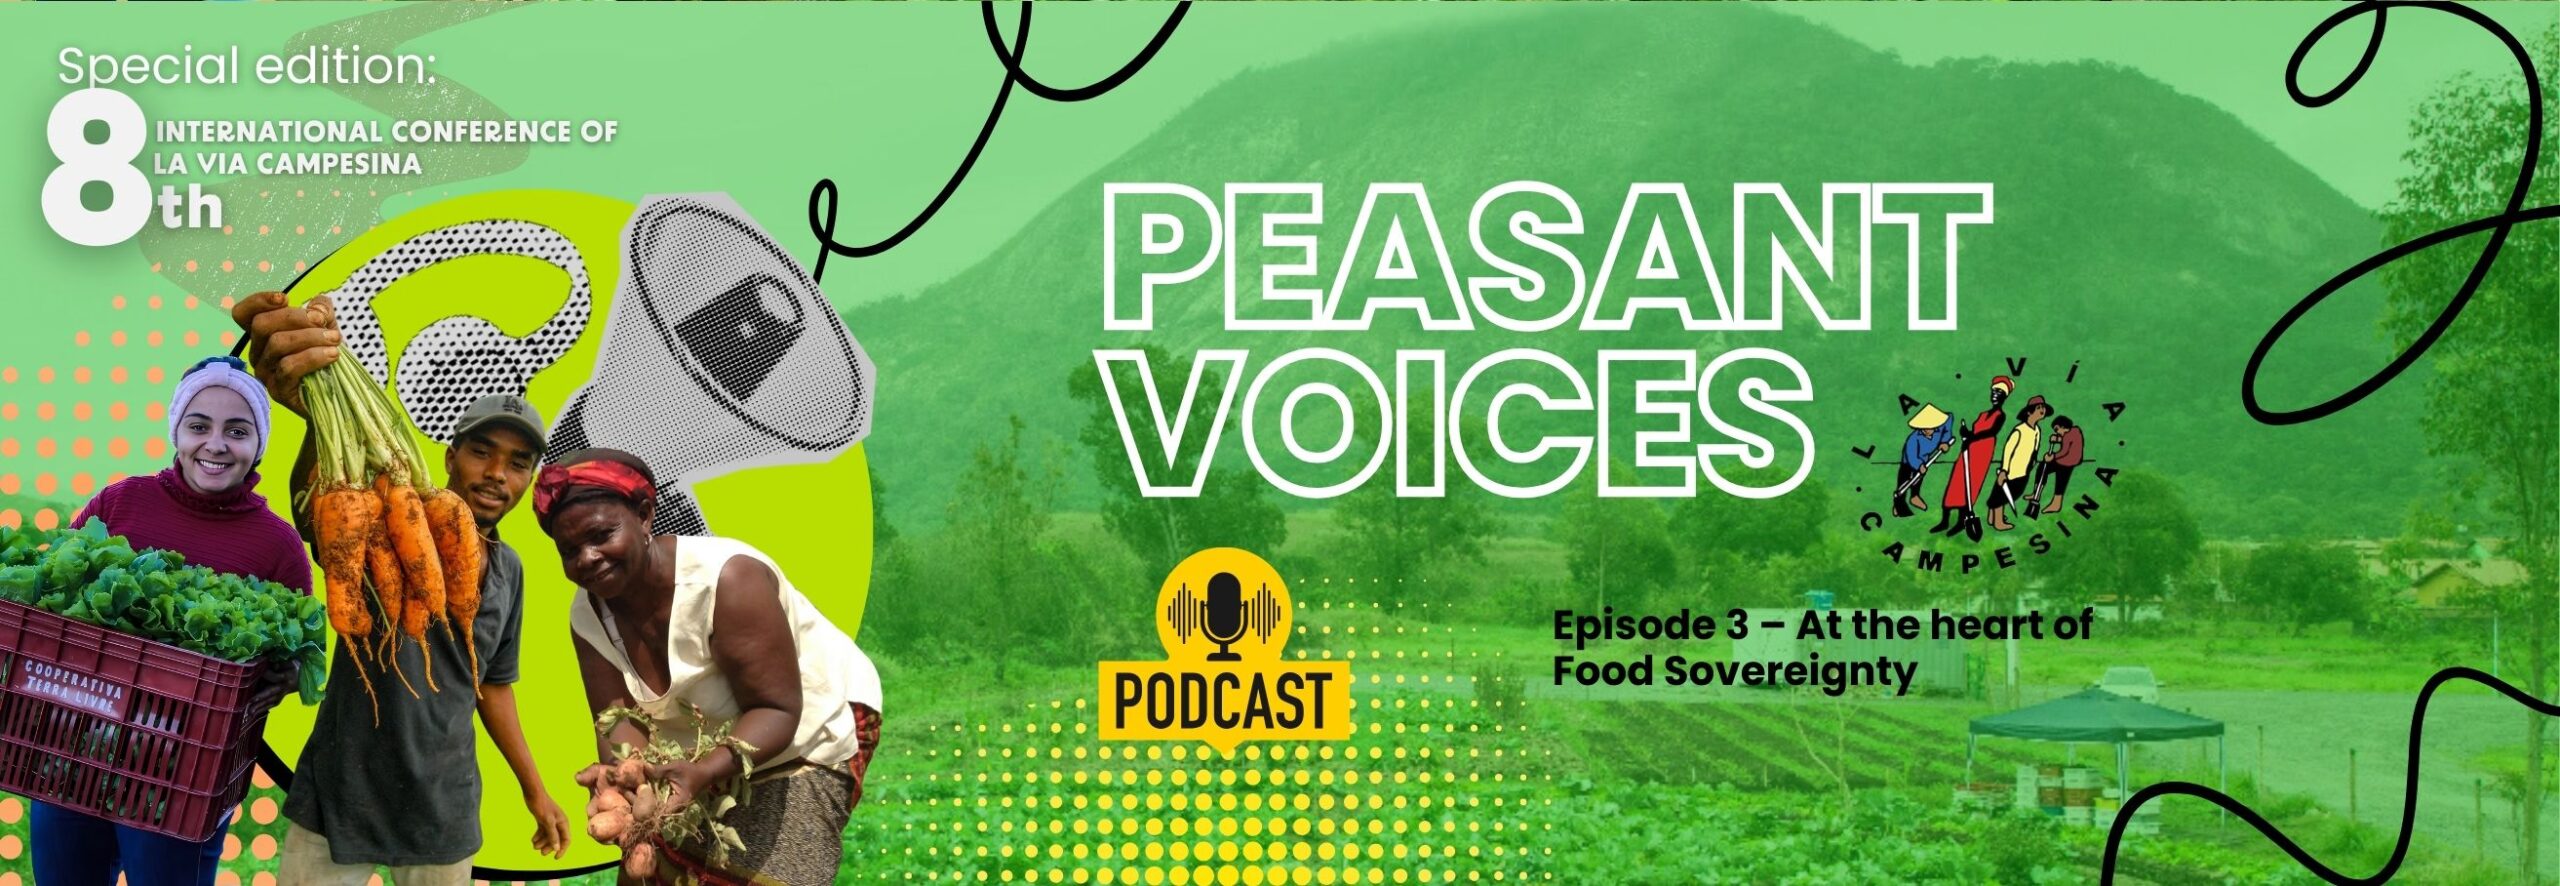 PEASANT VOICES | Episode 3 – At the heart of Food Sovereignty